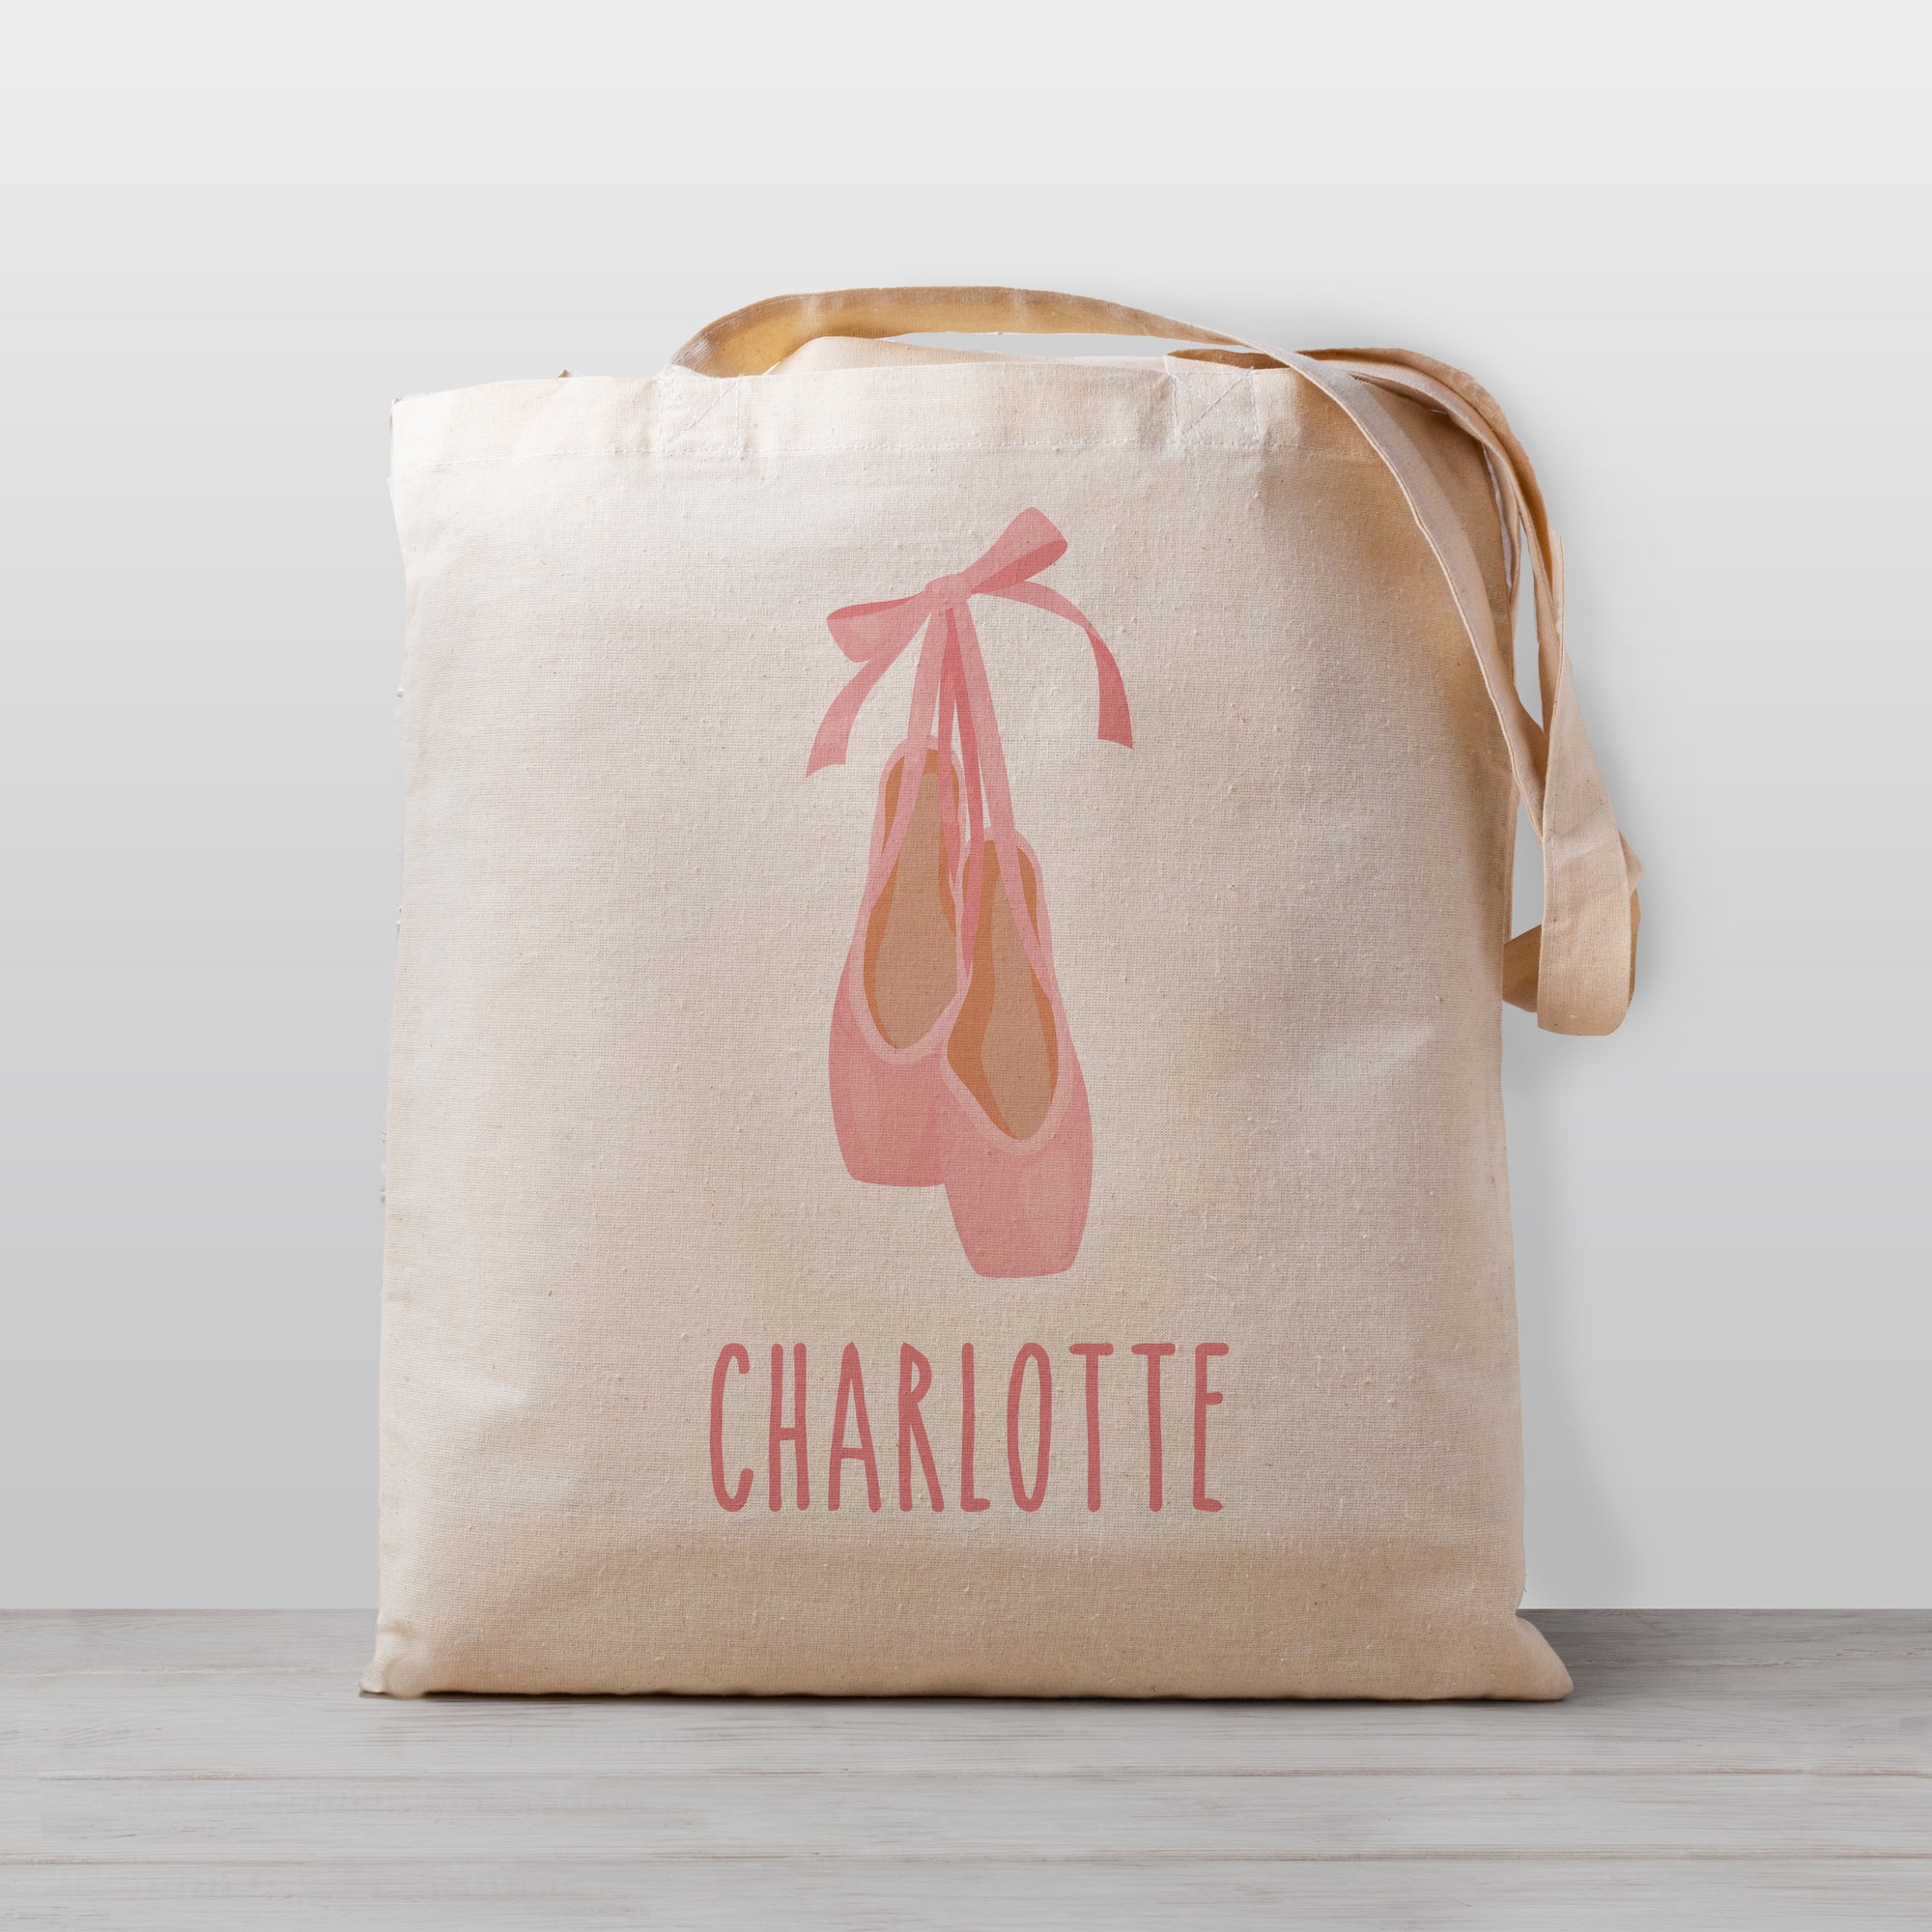 Ballet Shoes personalized tote bag, perfect for your little ballerina to bring all of her items to ballet class